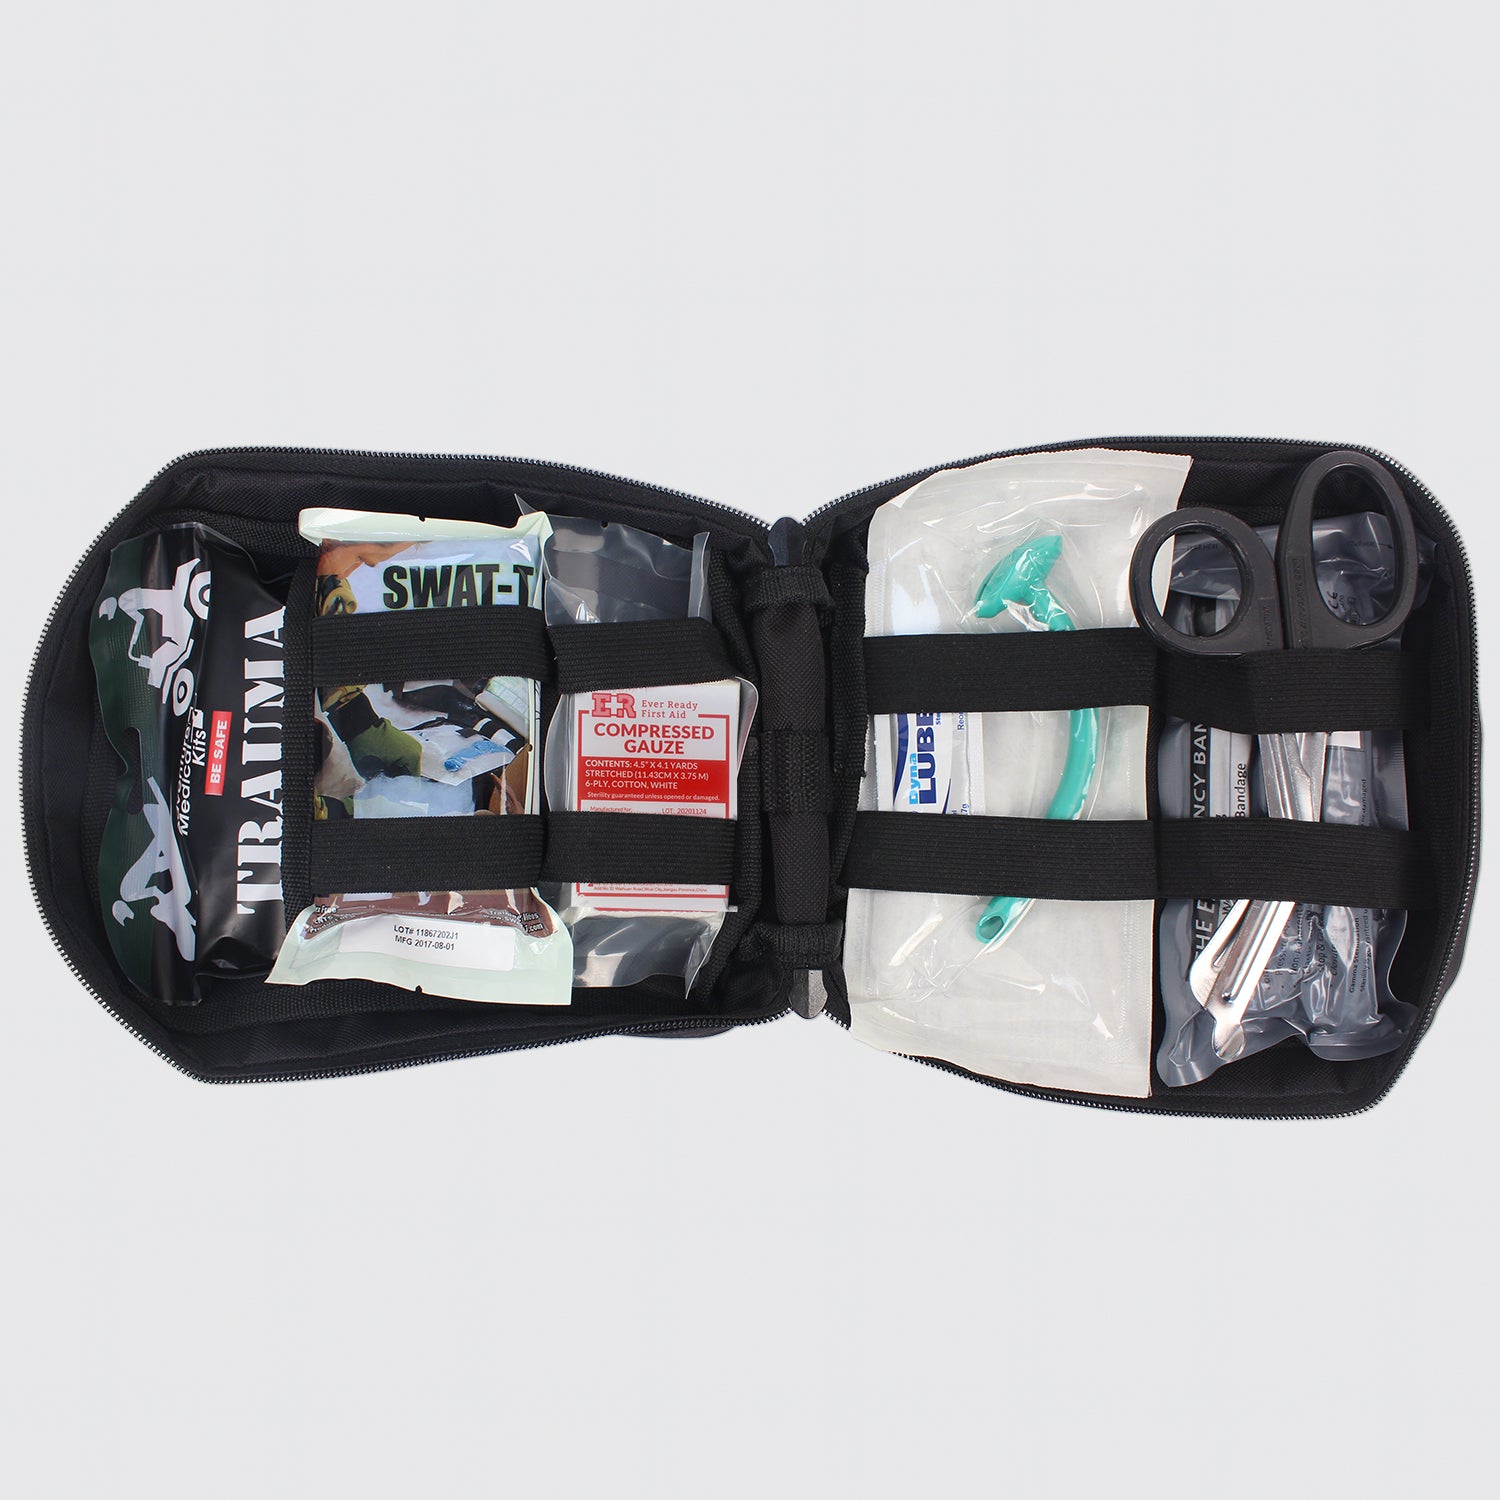 Ever Ready First Aid MediTac Tactical Trauma IFAK Kit with Trauma Pack QuickClot and Israeli Bandage in Molle Pouch